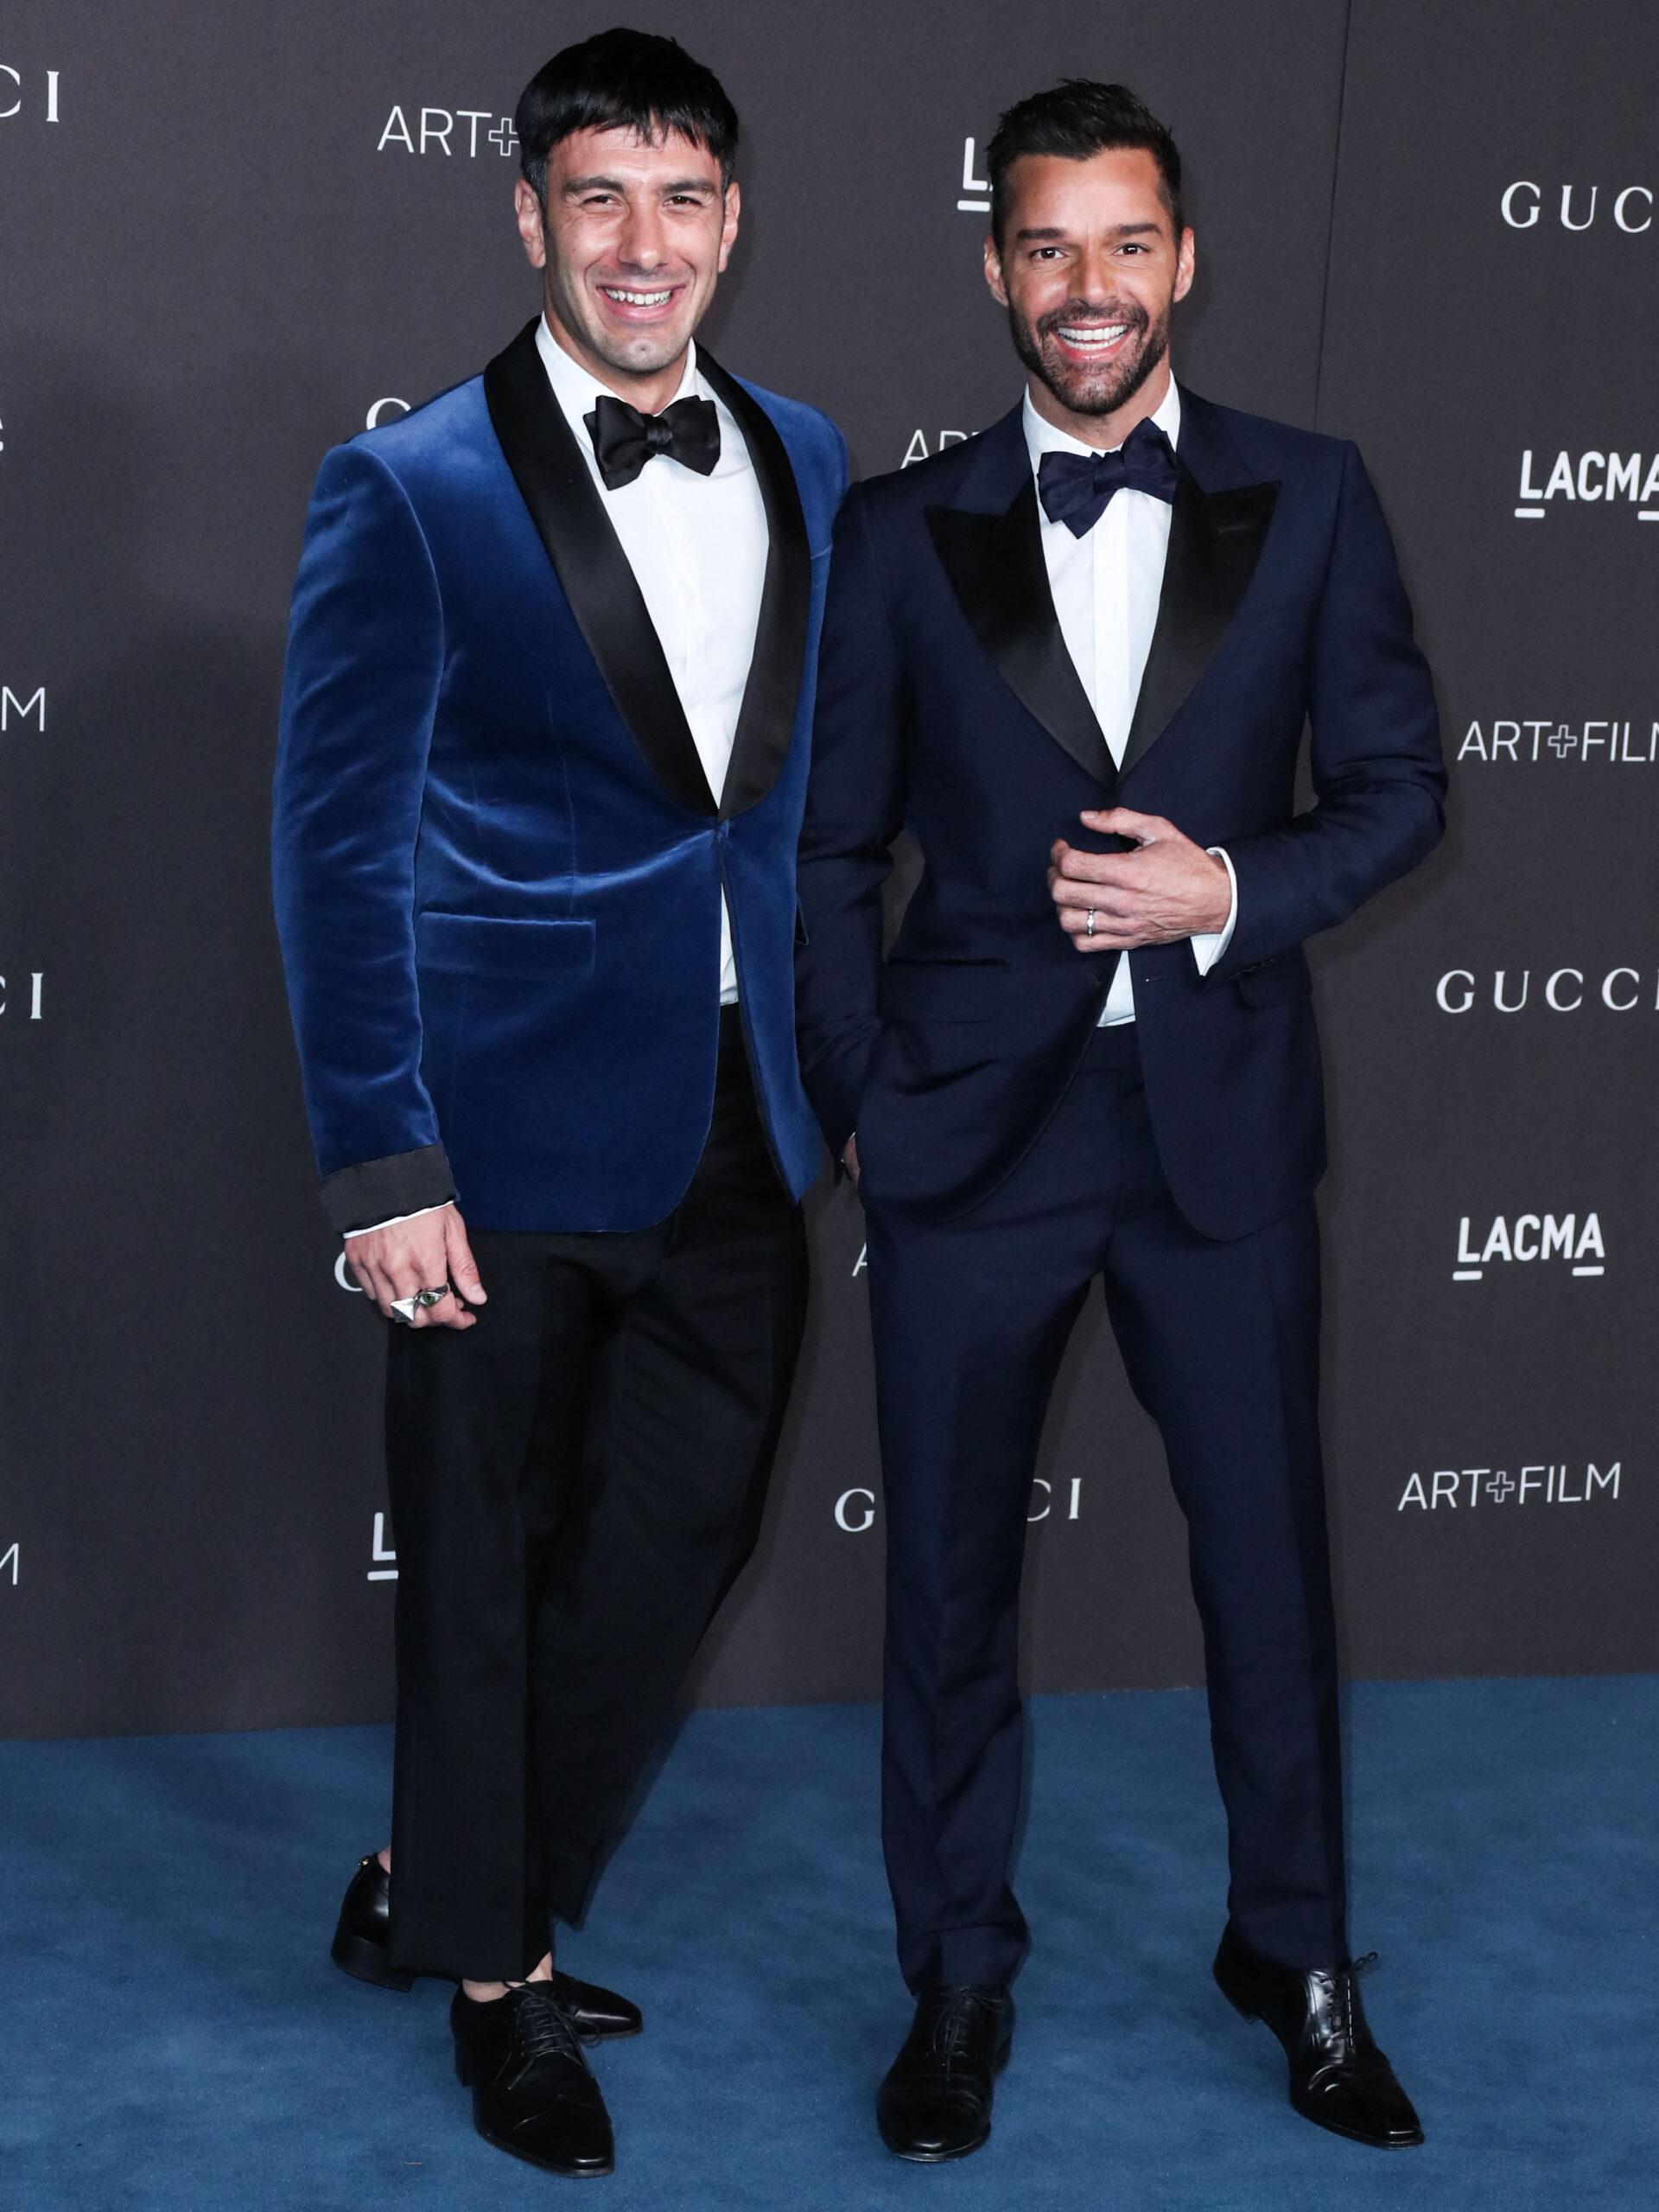 Ricky Martin And Husband Jwan Yosef SPLIT After 6 Years Of Marriage